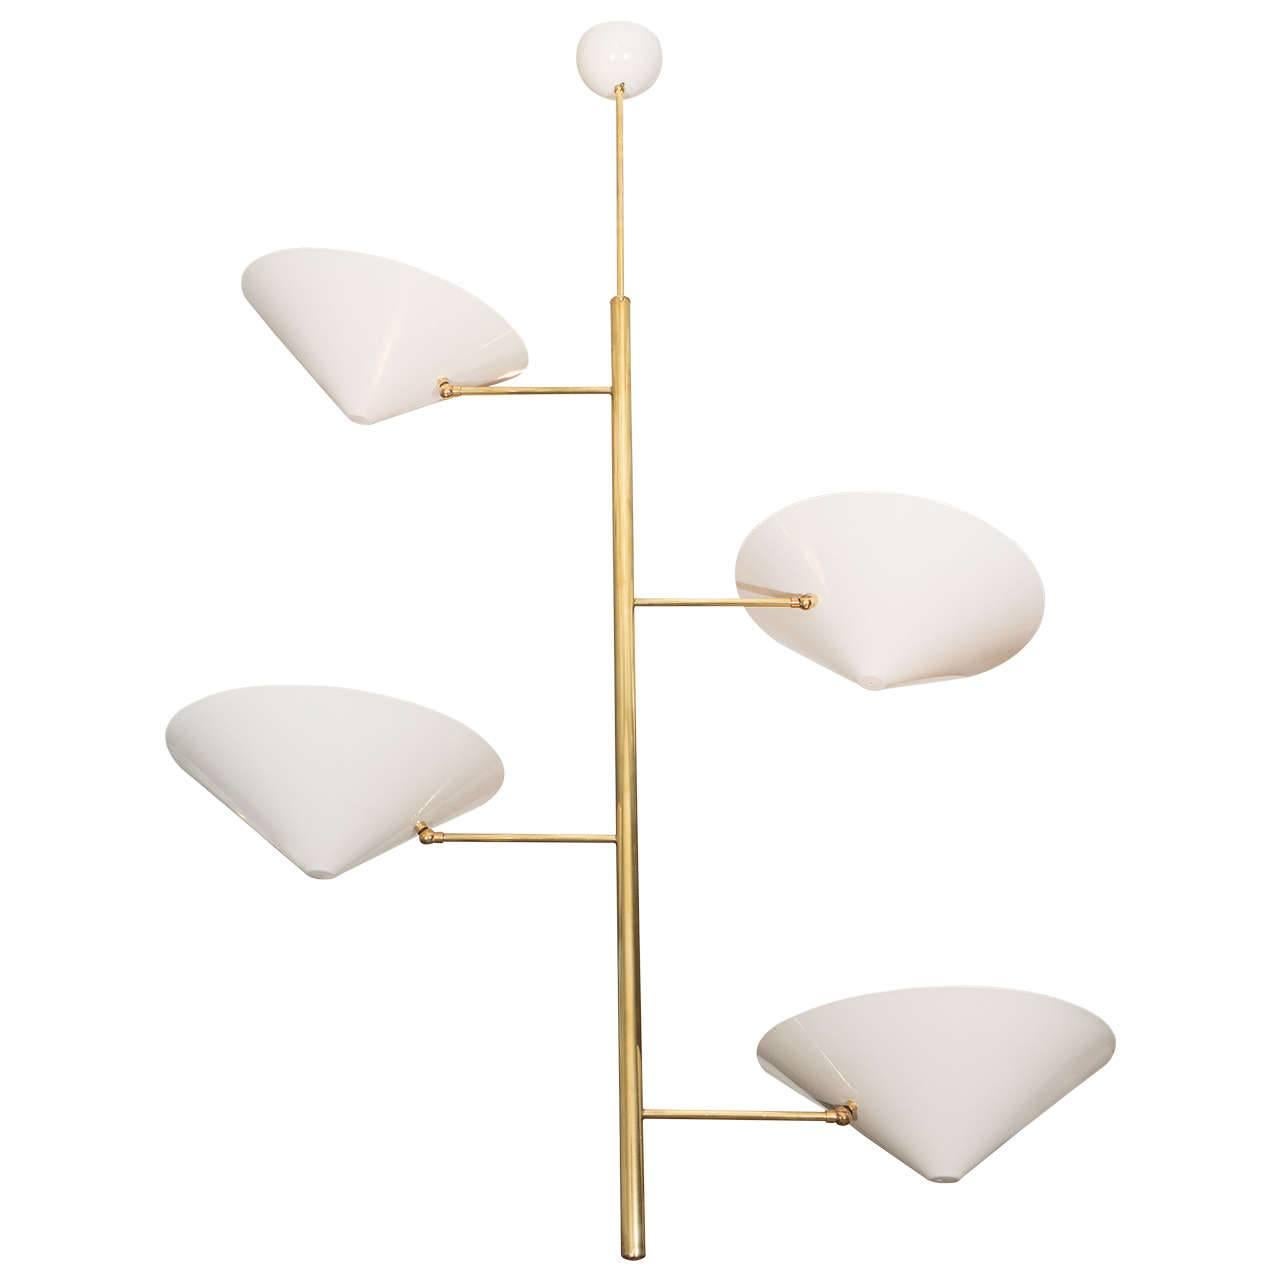 Tole Off-White Chandelier with Brass Rod and Four Round Adjustable Shades, Italy